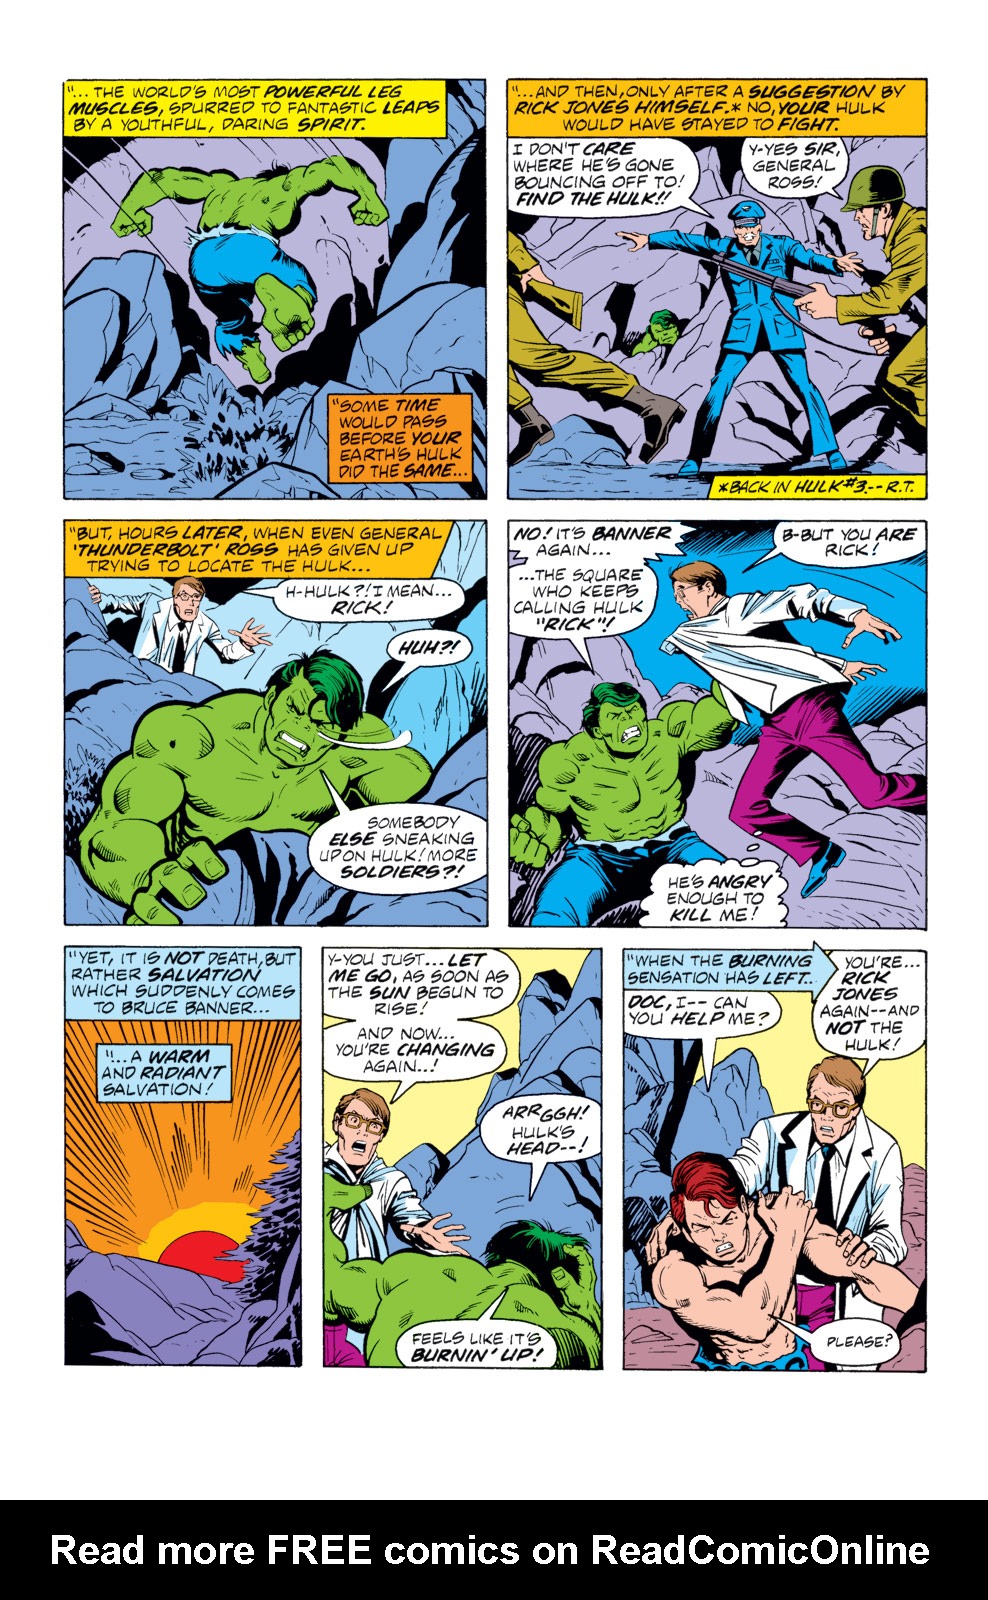 What If? (1977) issue 12 - Rick Jones had become the Hulk - Page 6